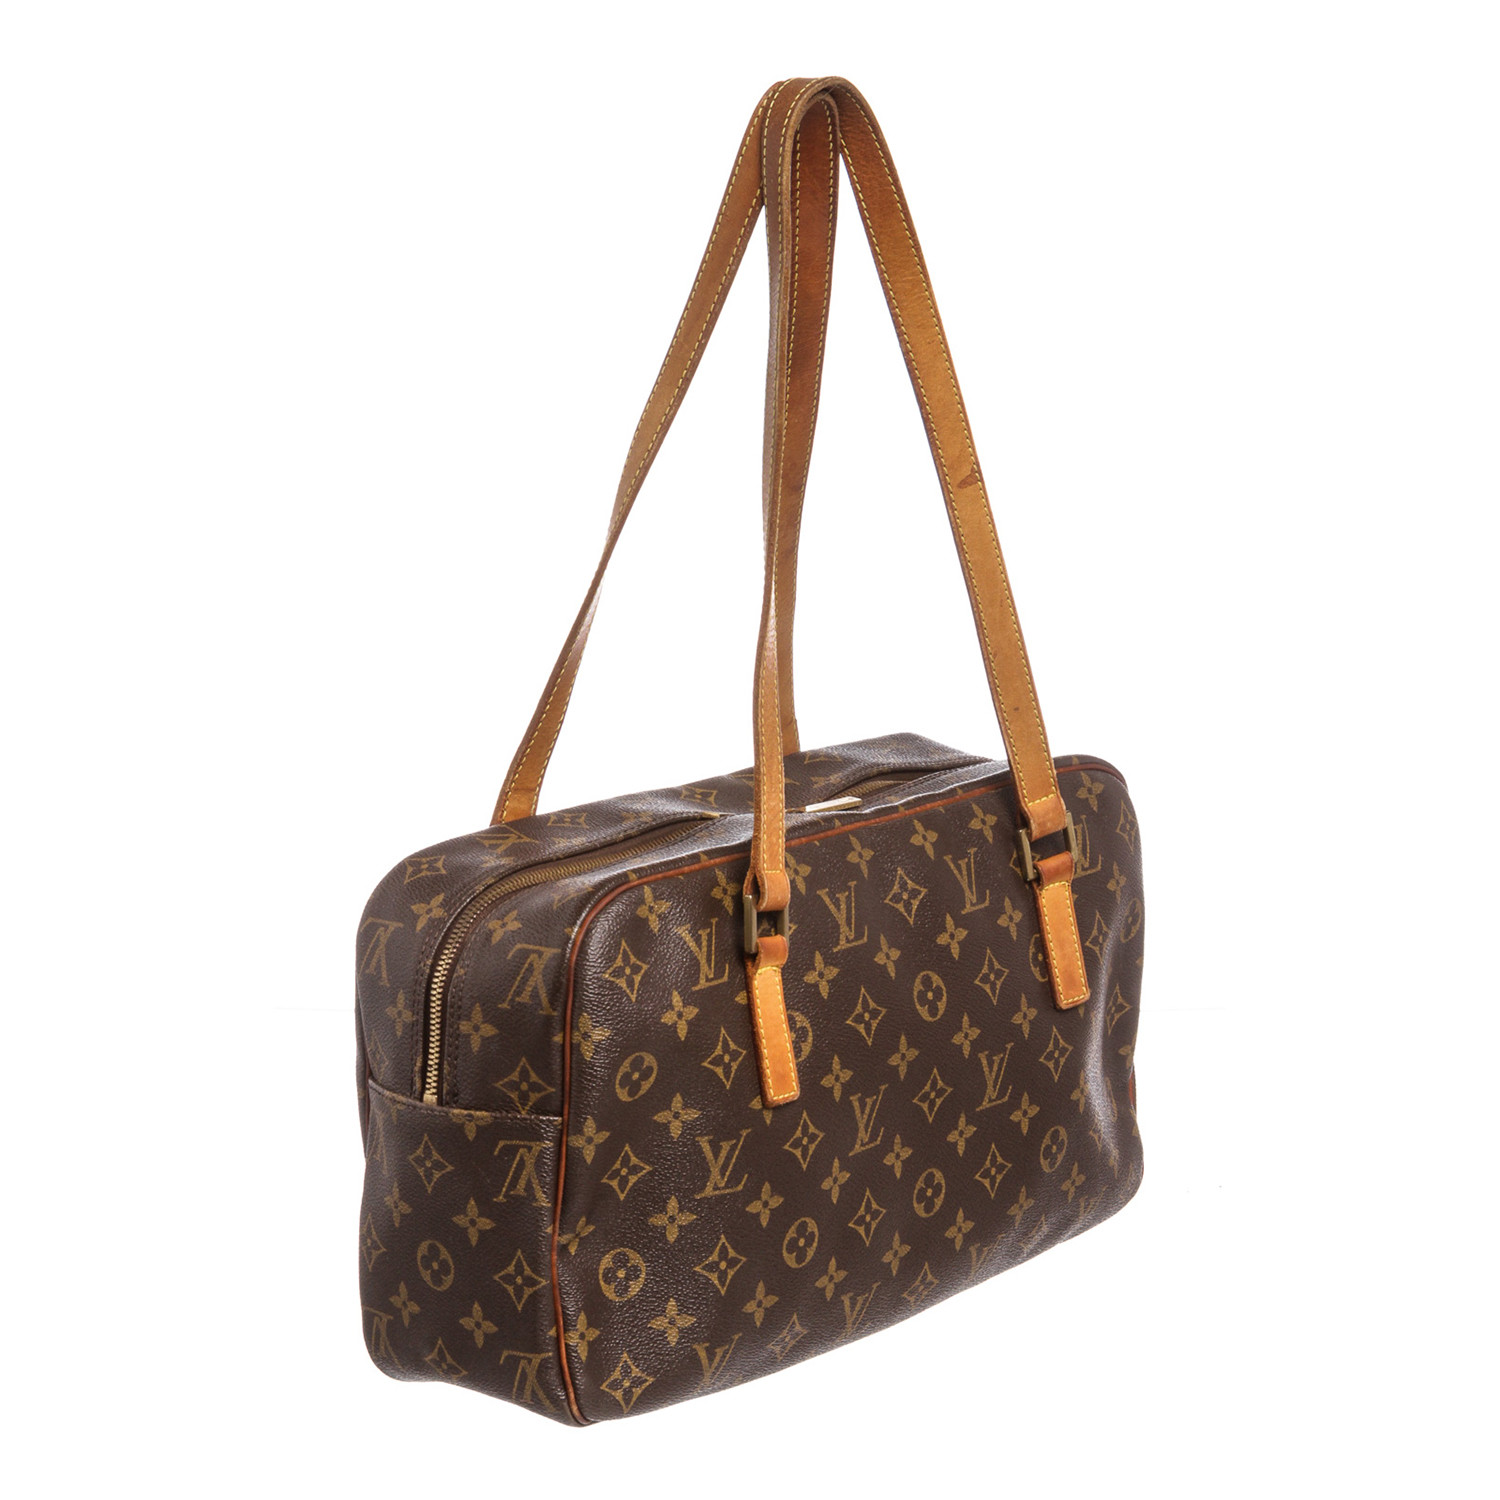 Used Lv Bags Canada  Natural Resource Department